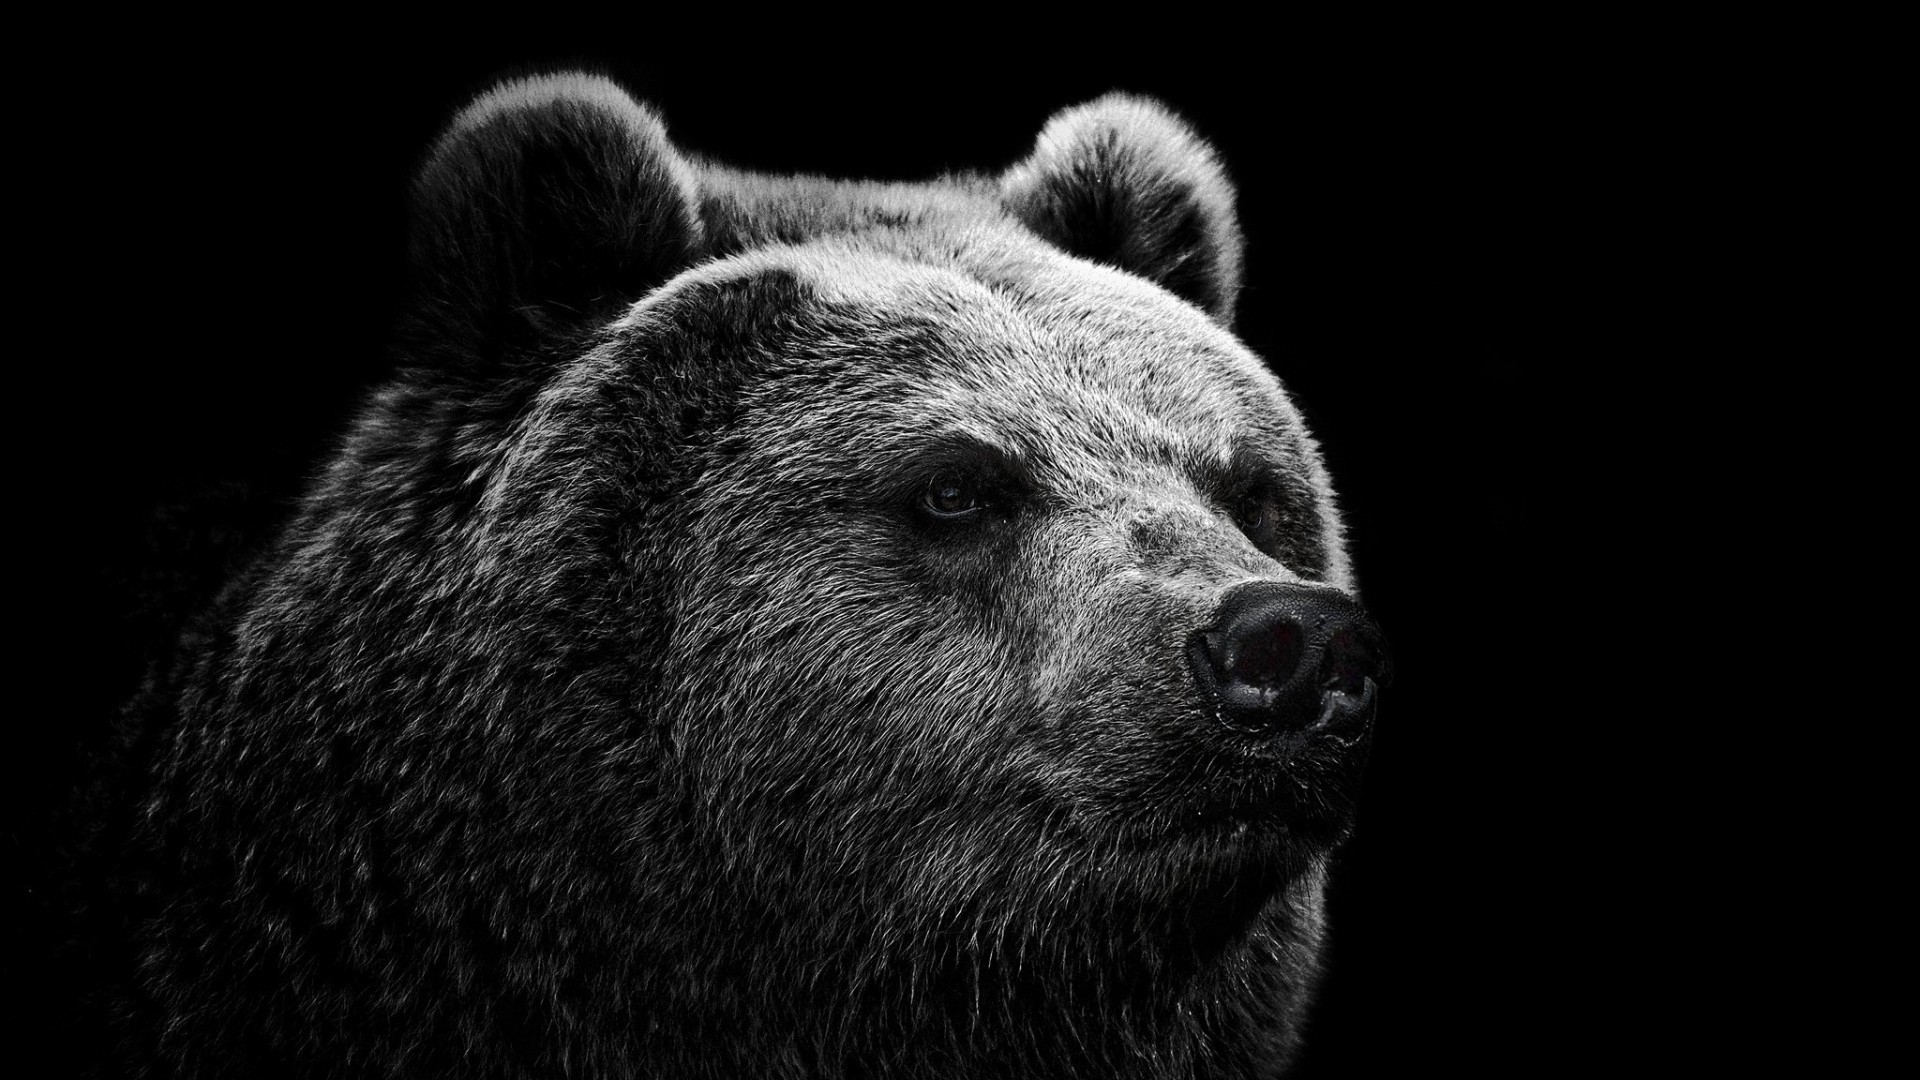 bears monochrome animals simple background Wallpapers HD ...